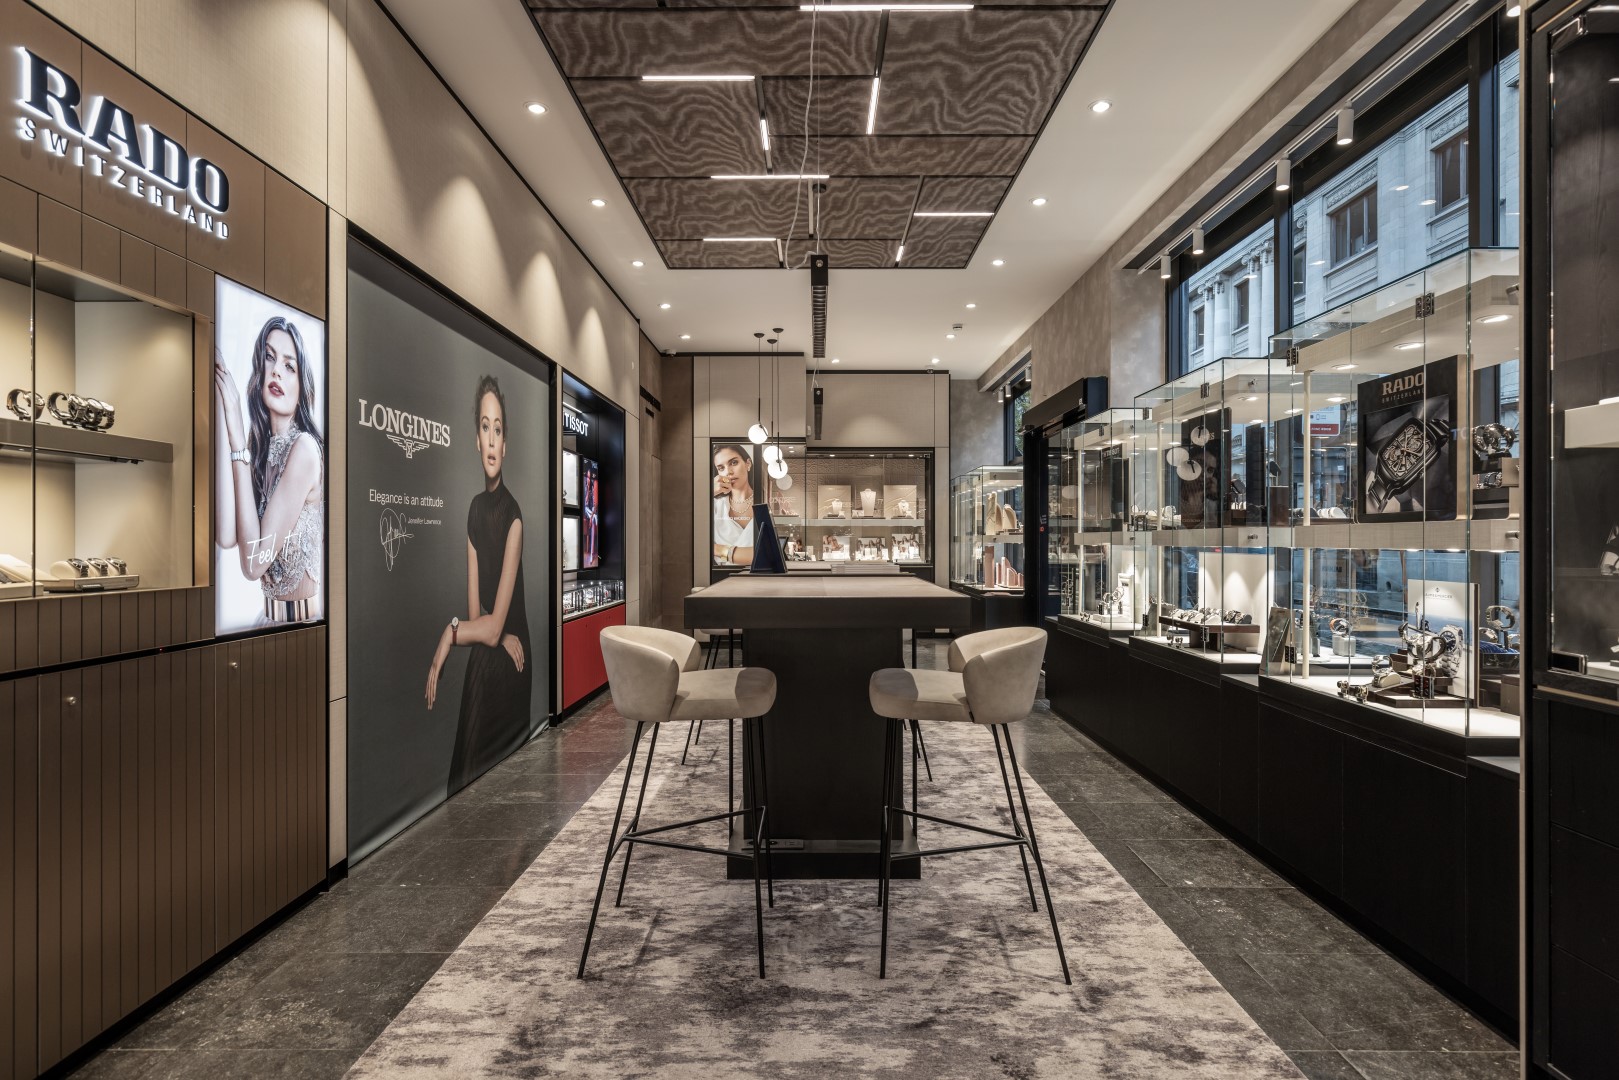 View of the interior with transparent shop window showcases from brands such as Rado and Longines